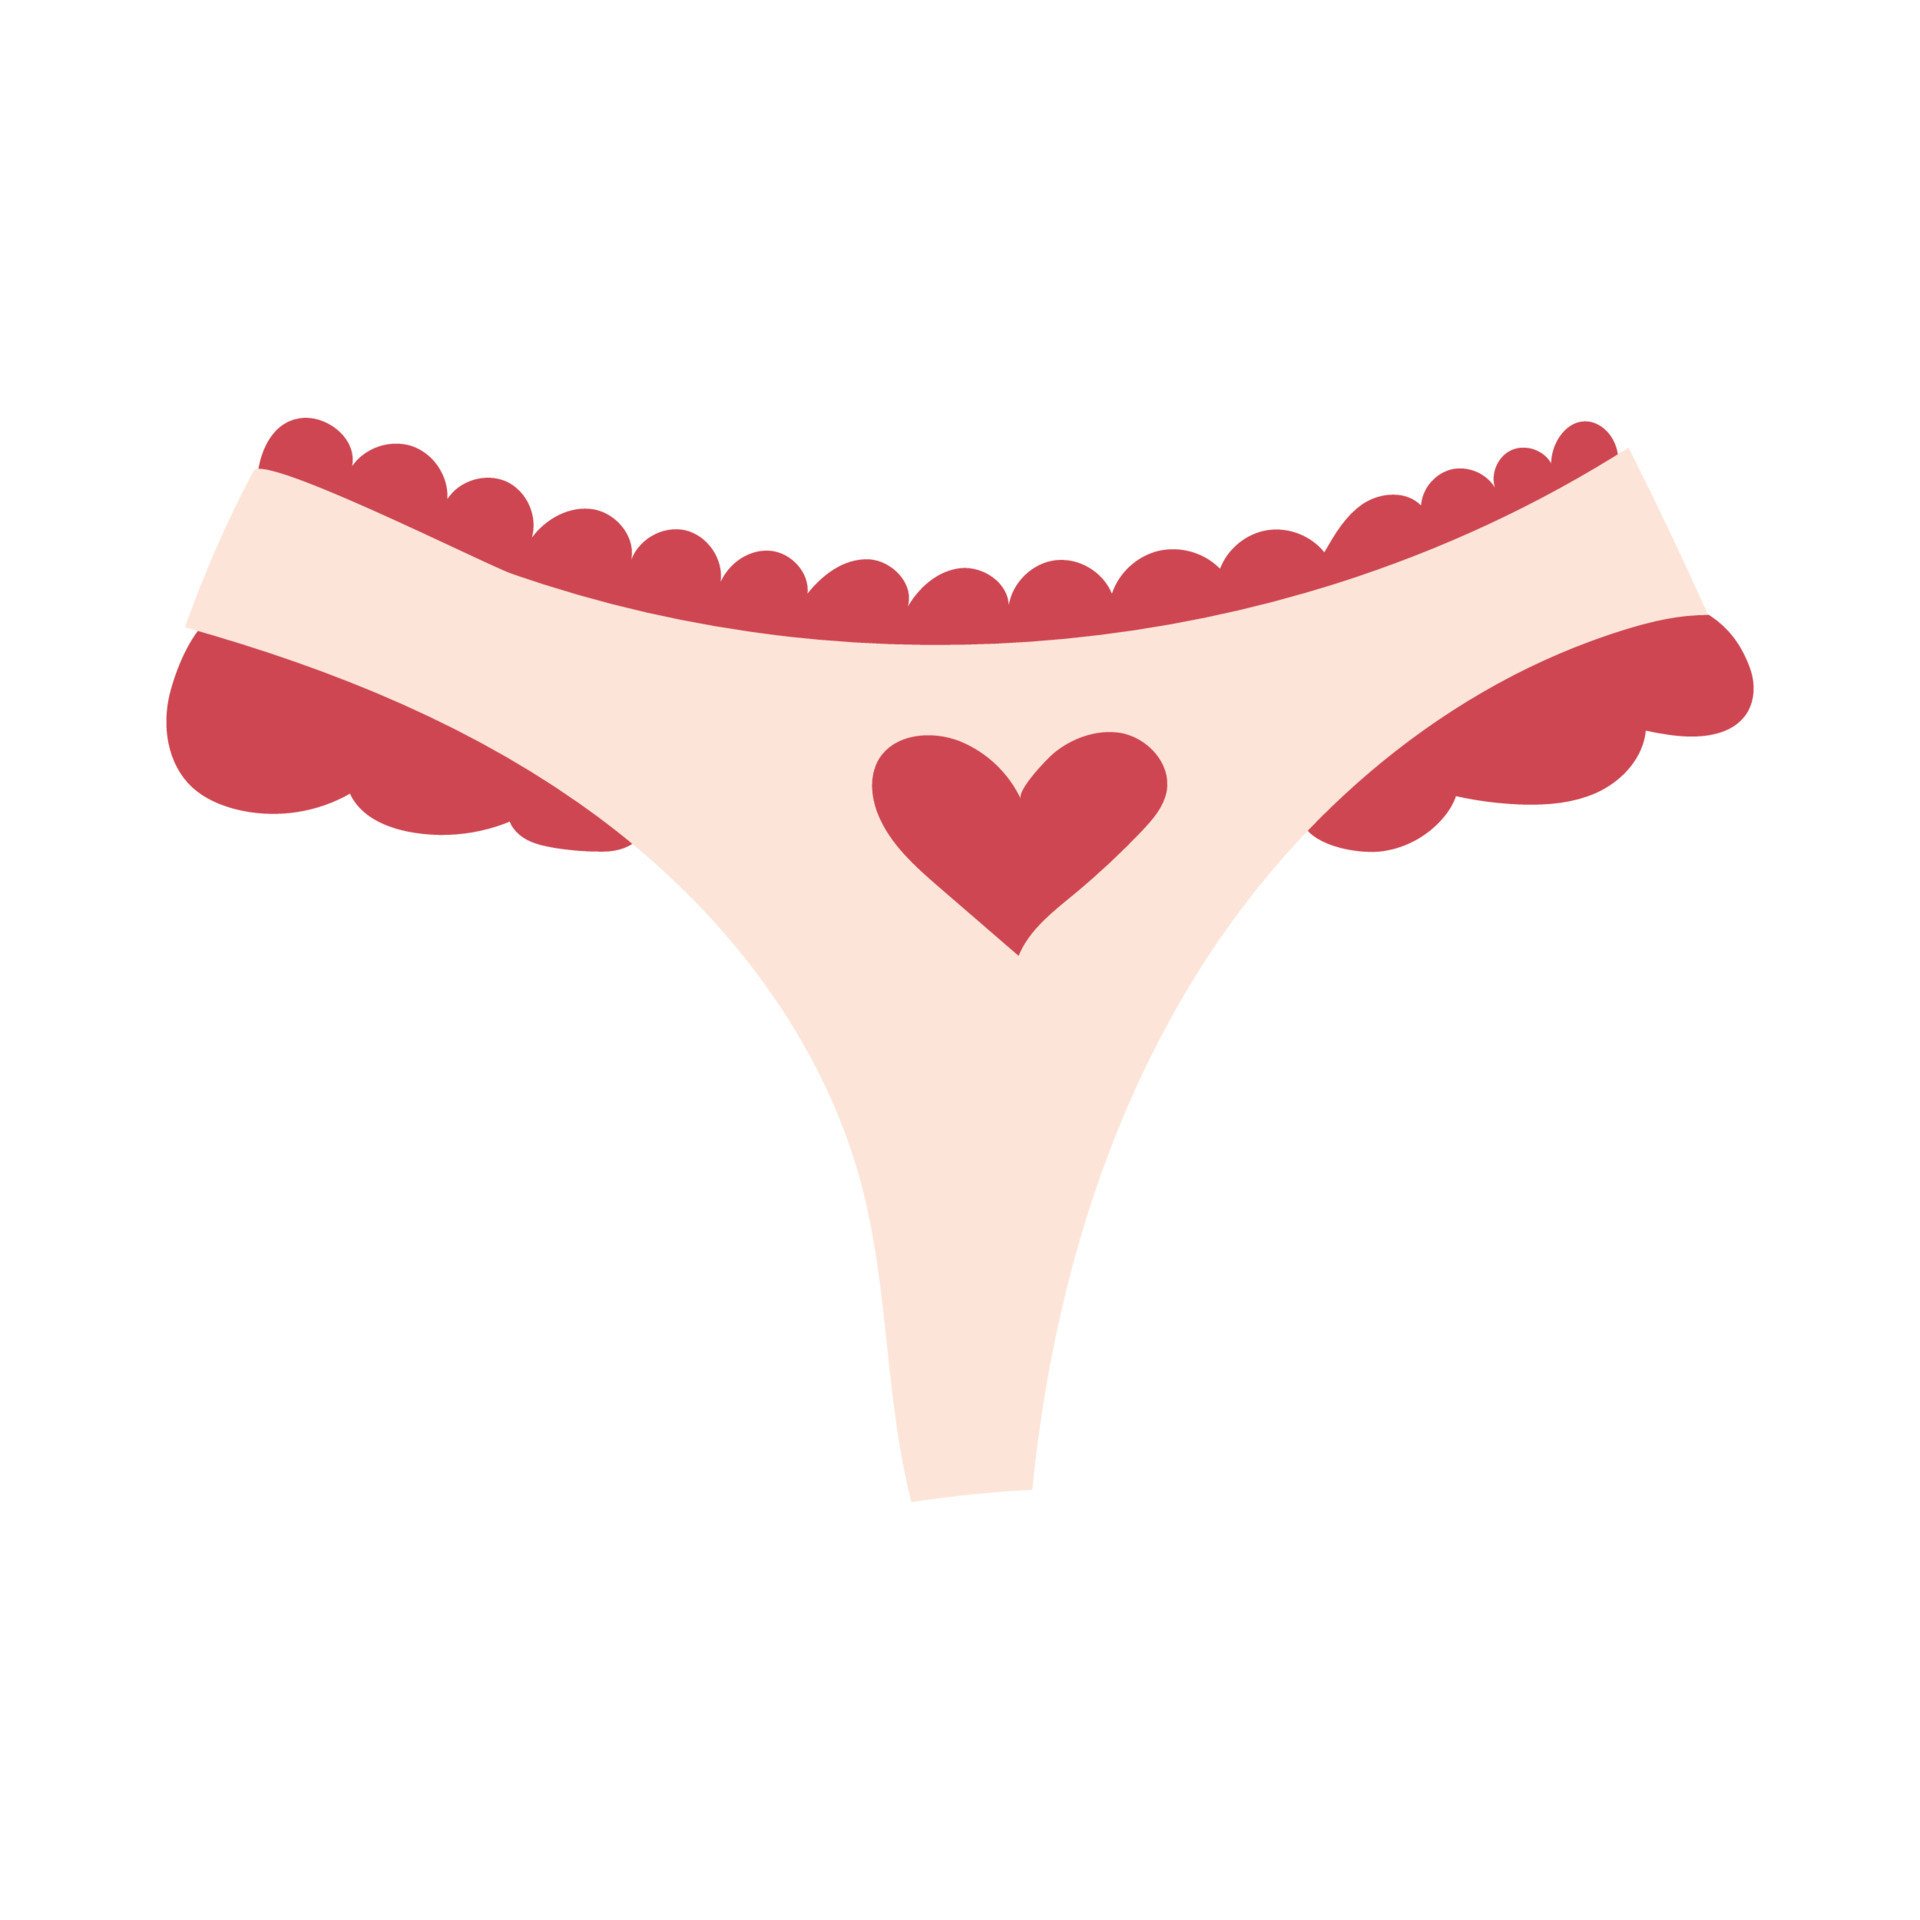 https://static.vecteezy.com/system/resources/previews/016/721/737/original/women-s-lace-panties-drawn-by-hand-valentines-day-card-illustration-vector.jpg